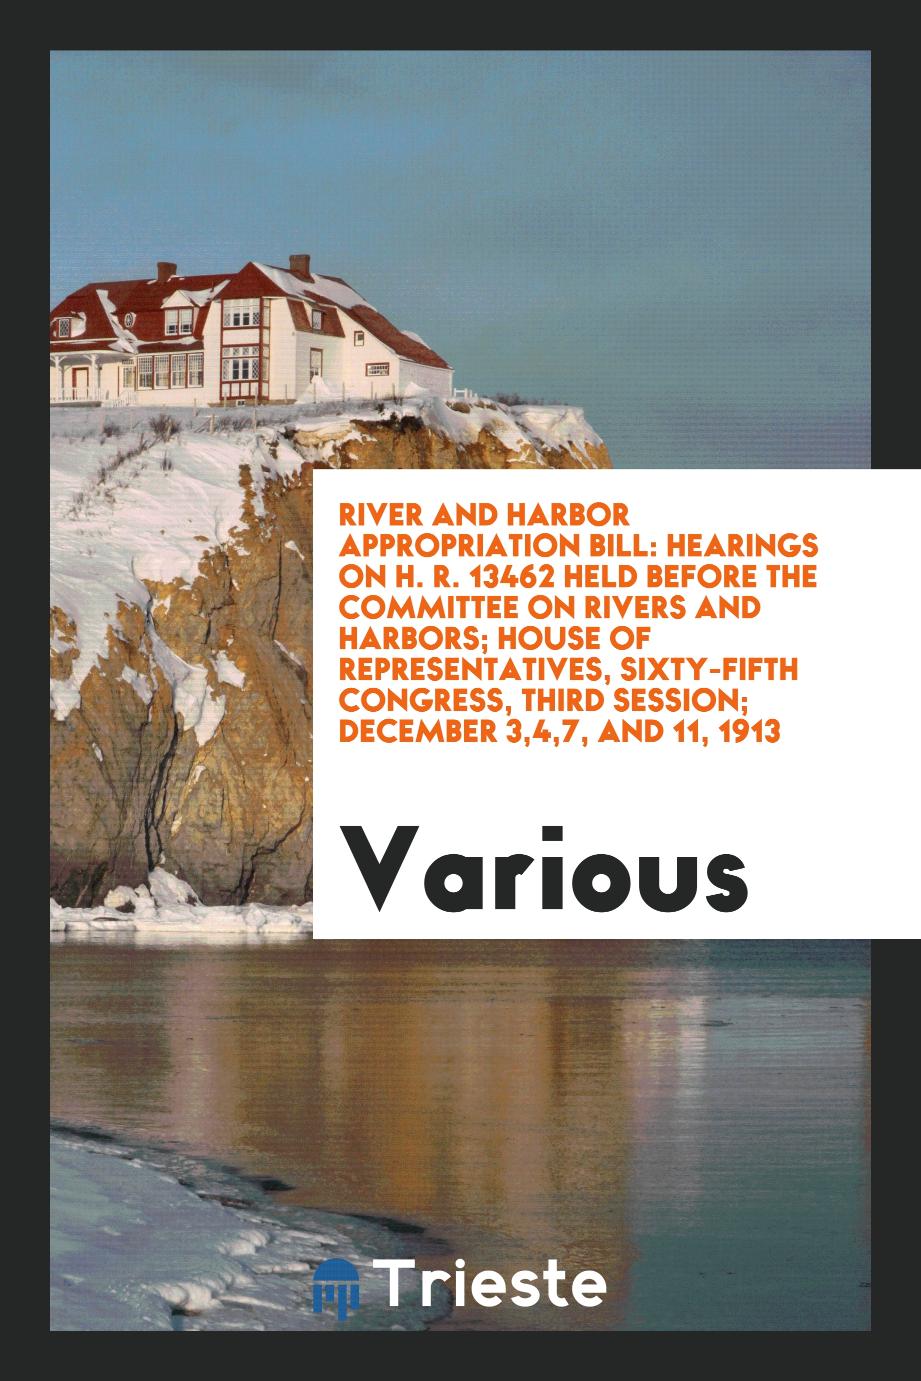 River and Harbor Appropriation Bill: Hearings on H. R. 13462 Held Before the Committee on Rivers and Harbors; House of Representatives, Sixty-Fifth Congress, Third Session; December 3,4,7, and 11, 1913